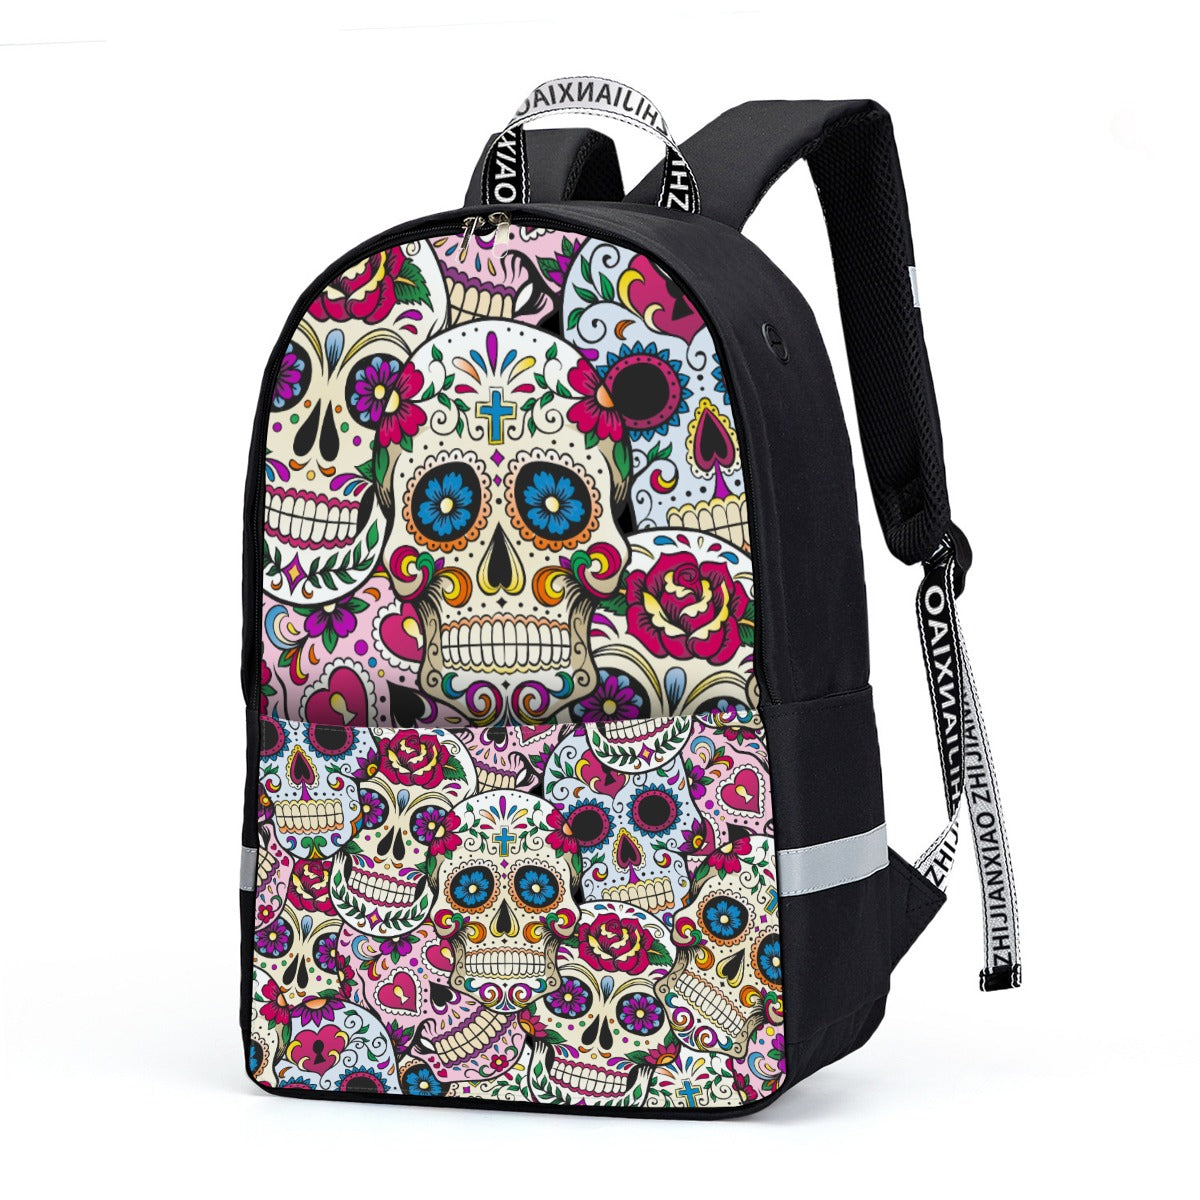 Dia de los muertos Backpack With Reflective Bar, Sugar skull day of the dead bag backpack